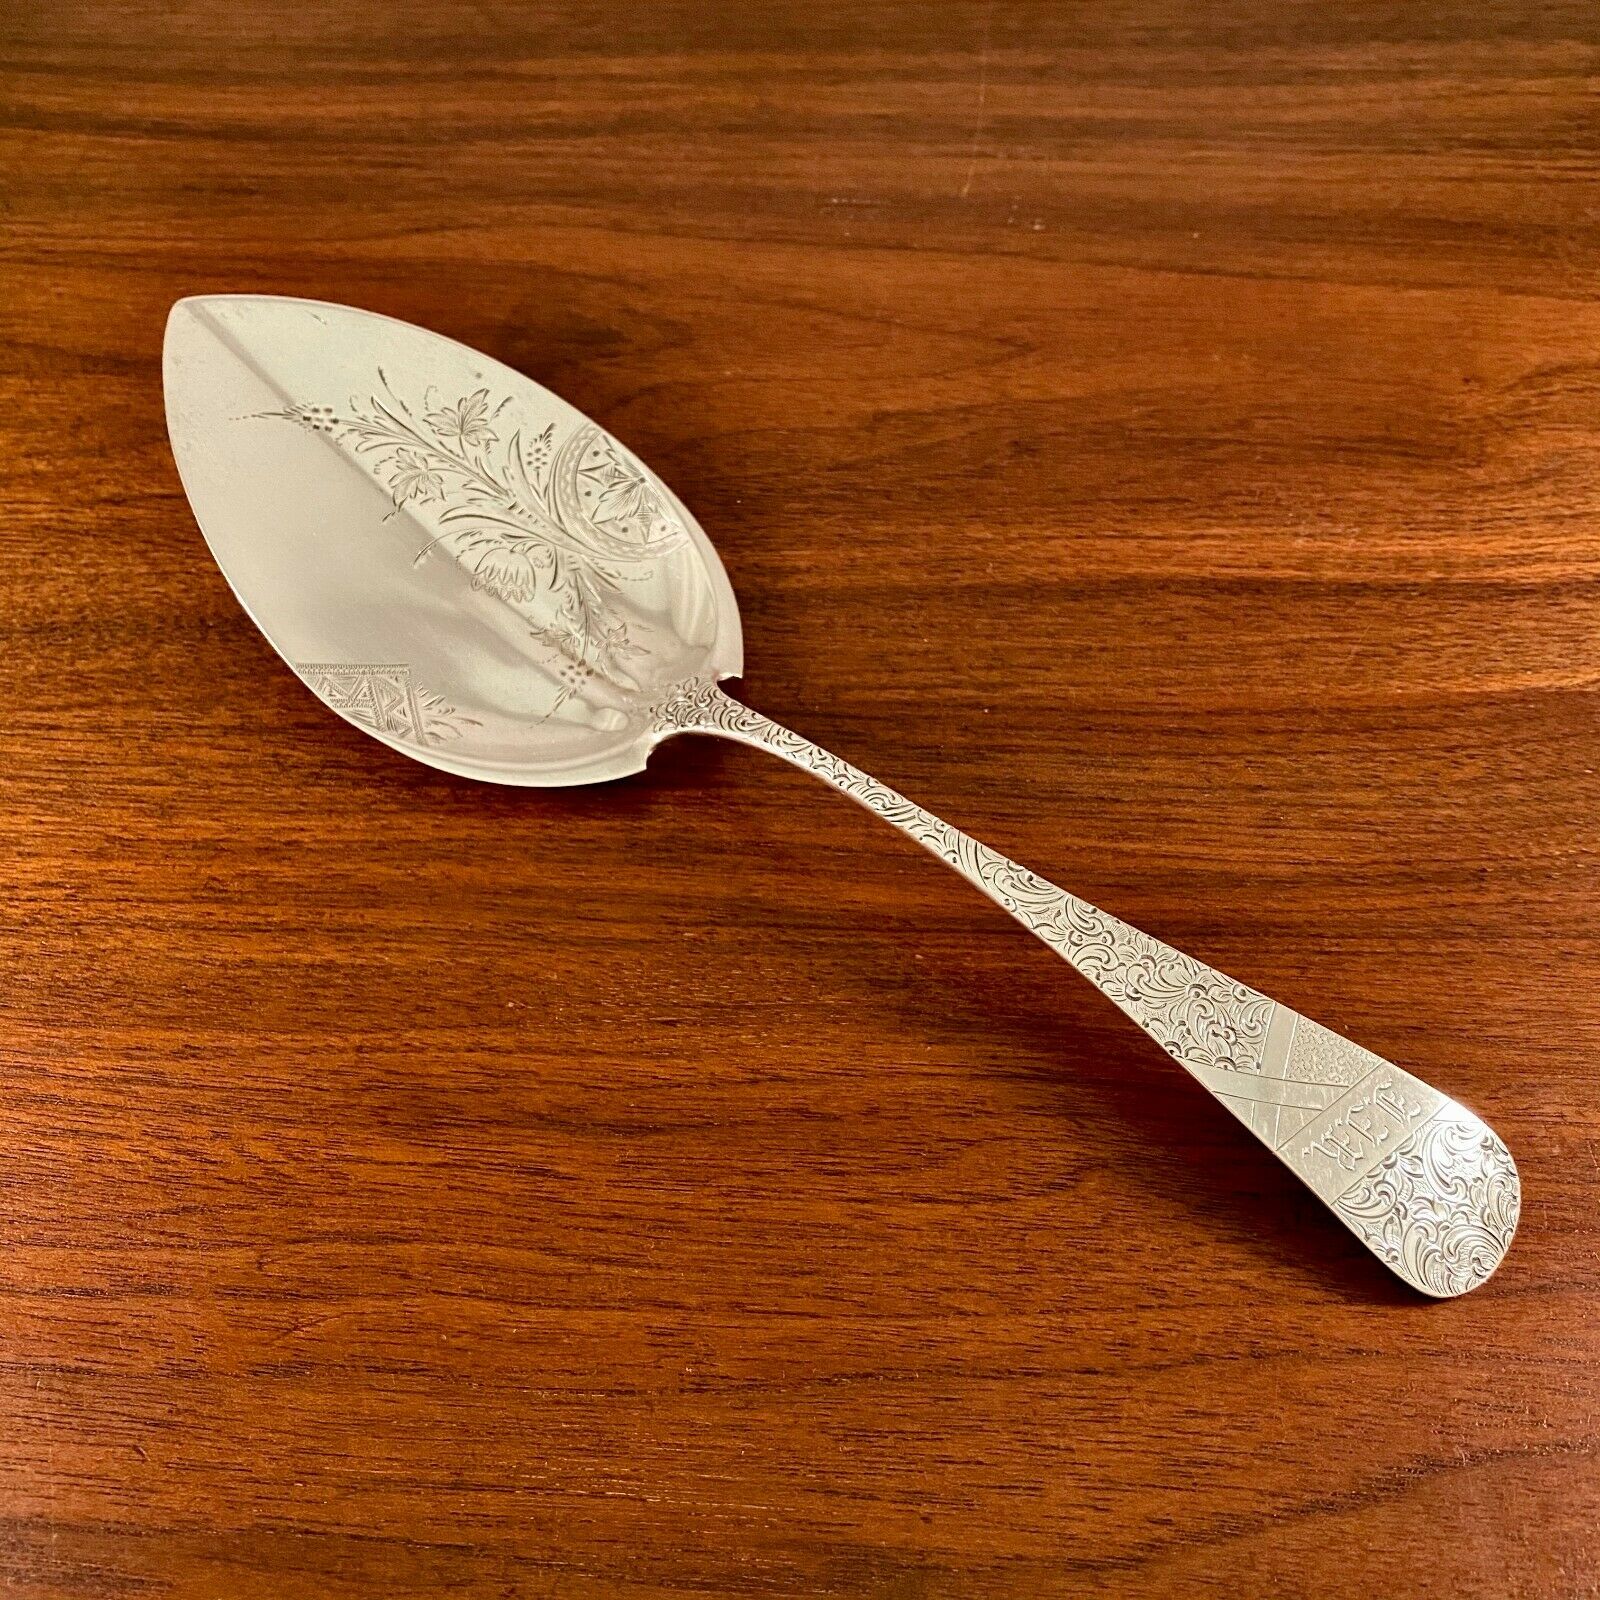 AESTHETIC AMERICAN SOLID STERLING SILVER HAND ETCHED PIE / CAKE SERVER KNIFE